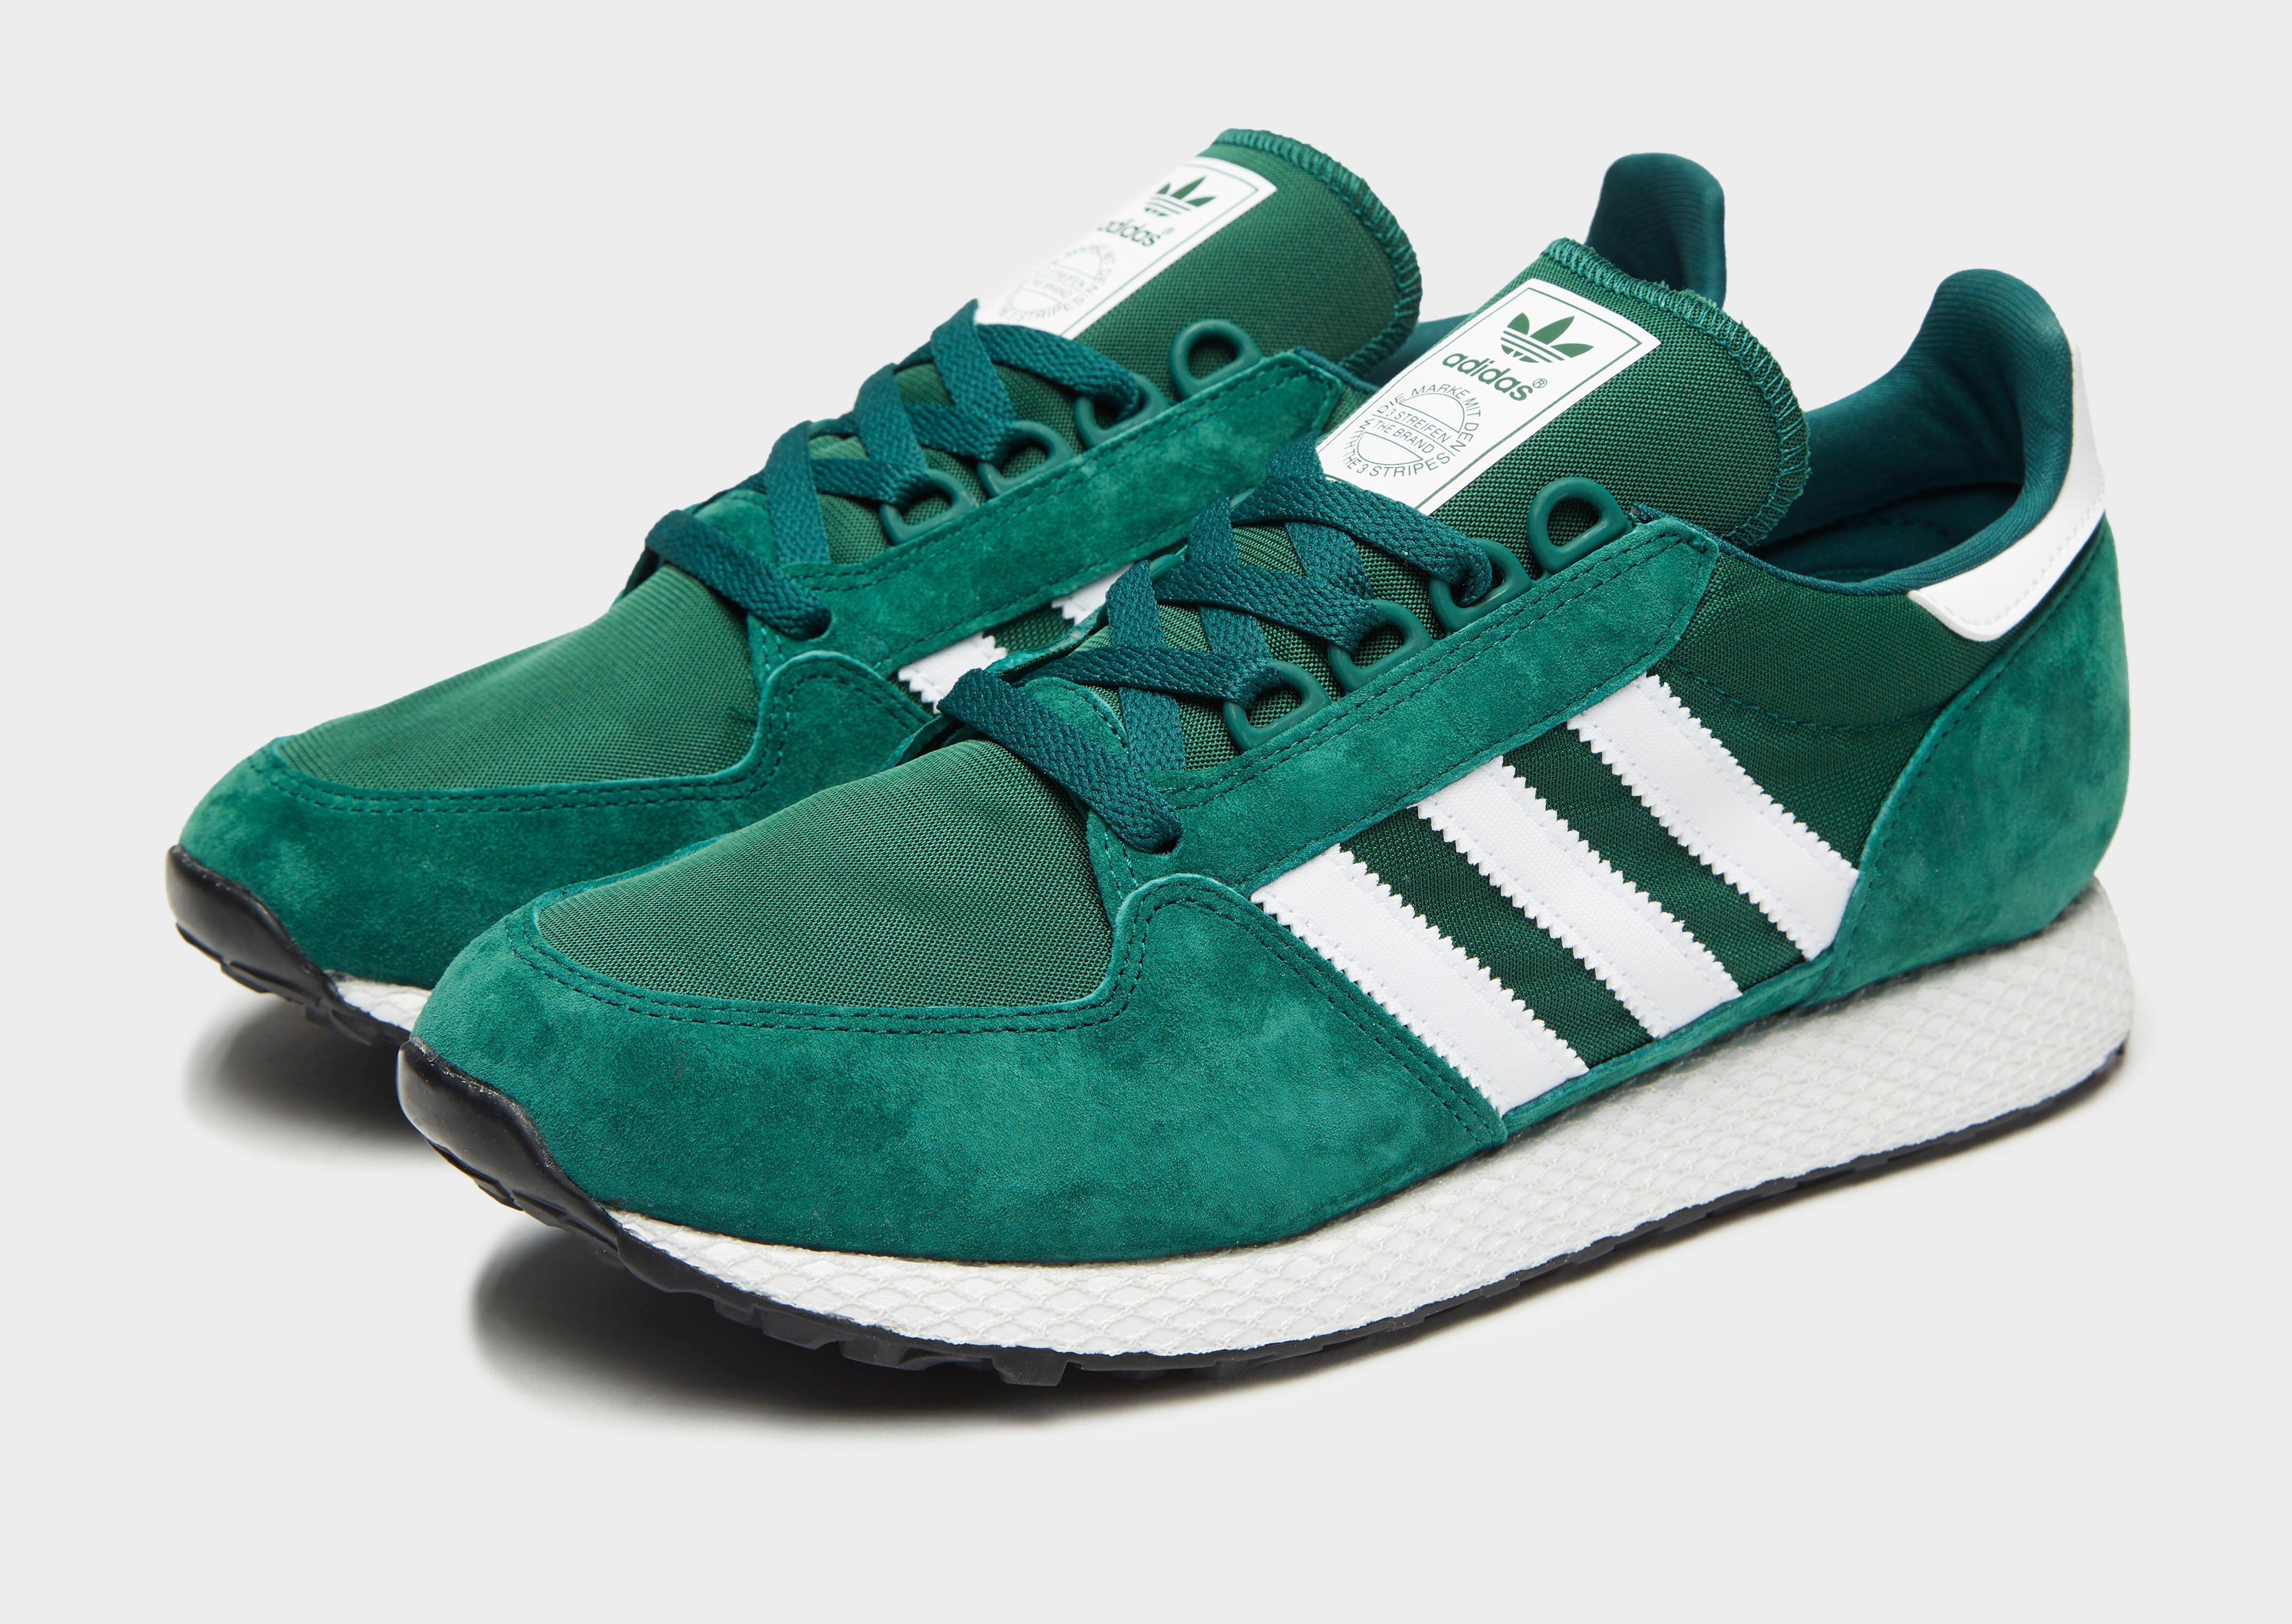 adidas forest grove verde for Sale,Up To OFF 73%